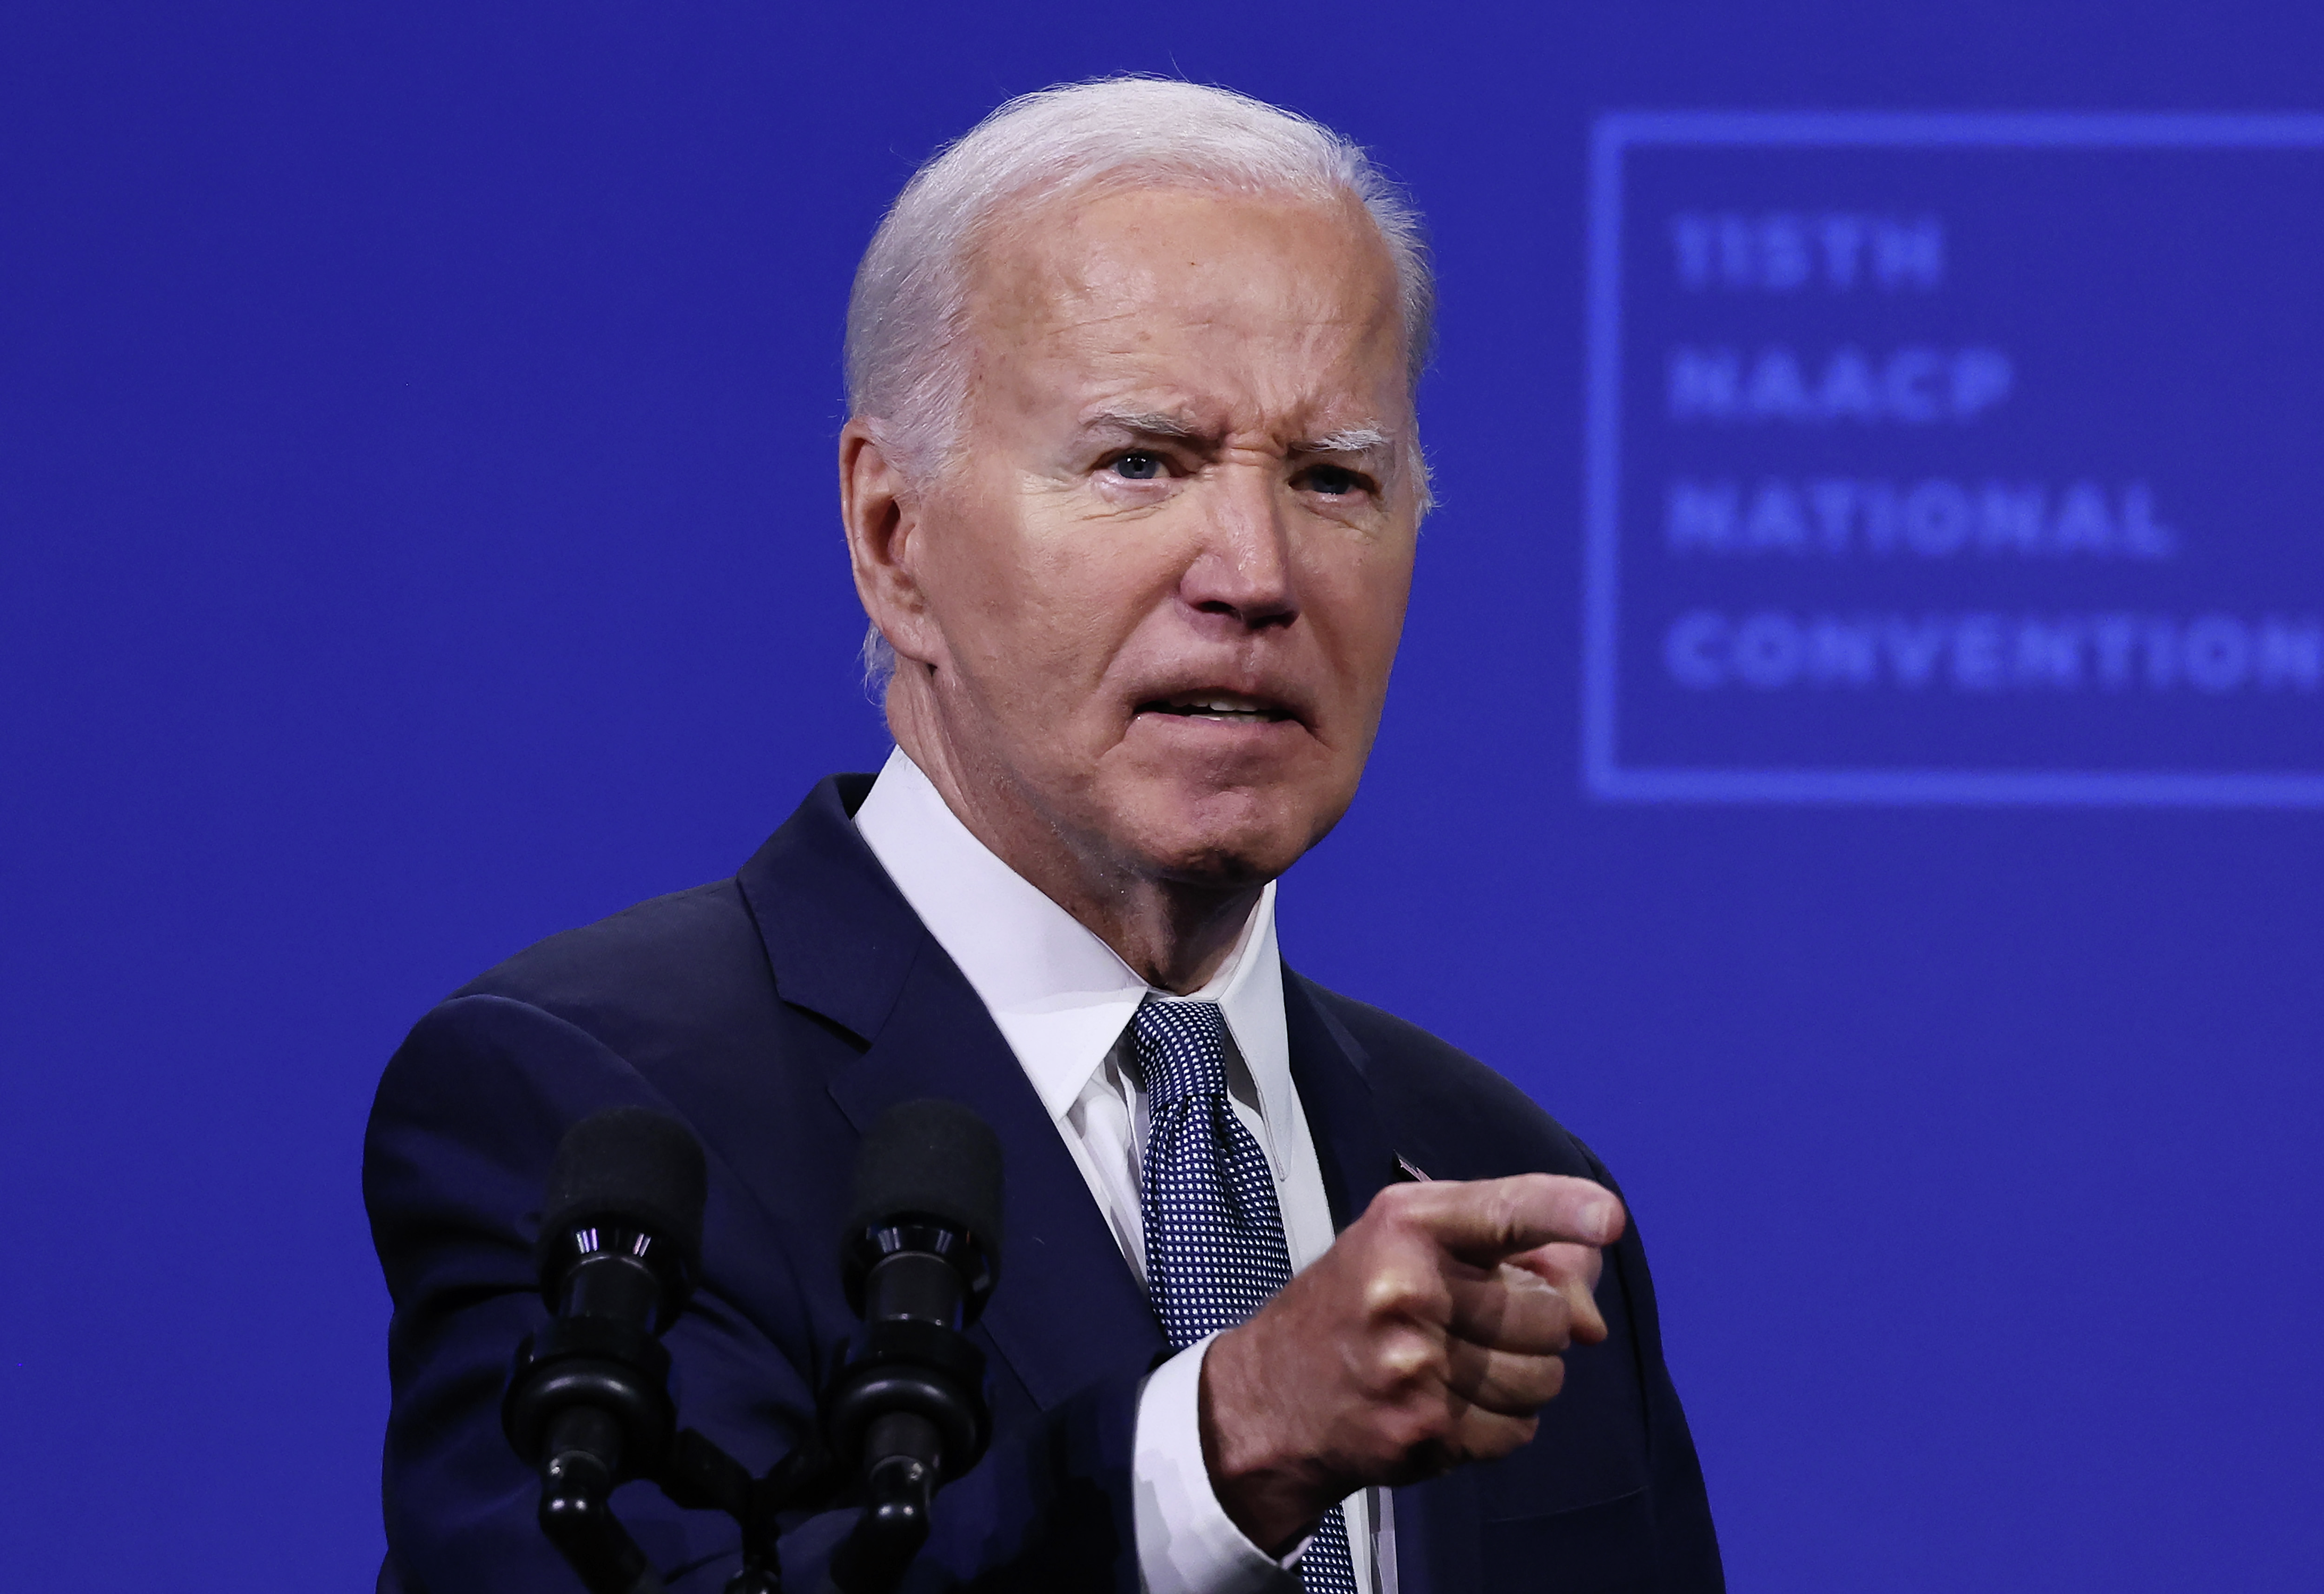 NEWSLINE: President Biden to give first speech since dropping out of race